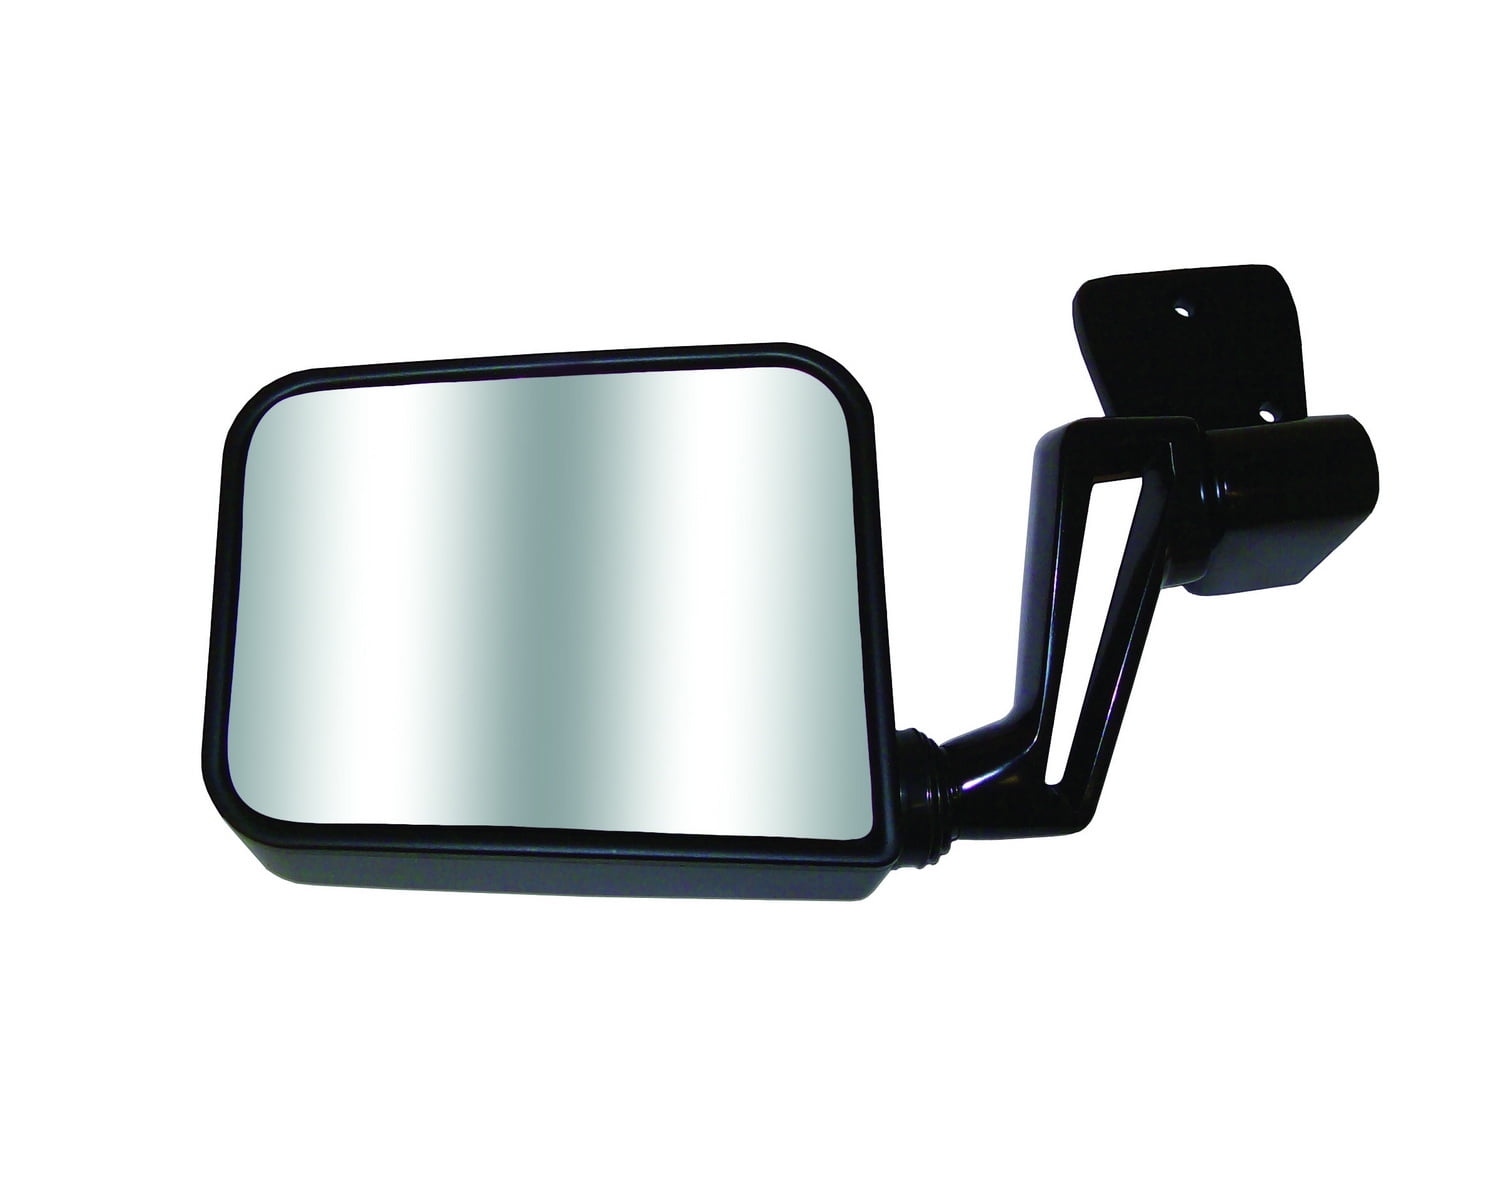 Original Style Replacement Mirror Jeep Driver Side Manual Foldaway Non-Heated Black